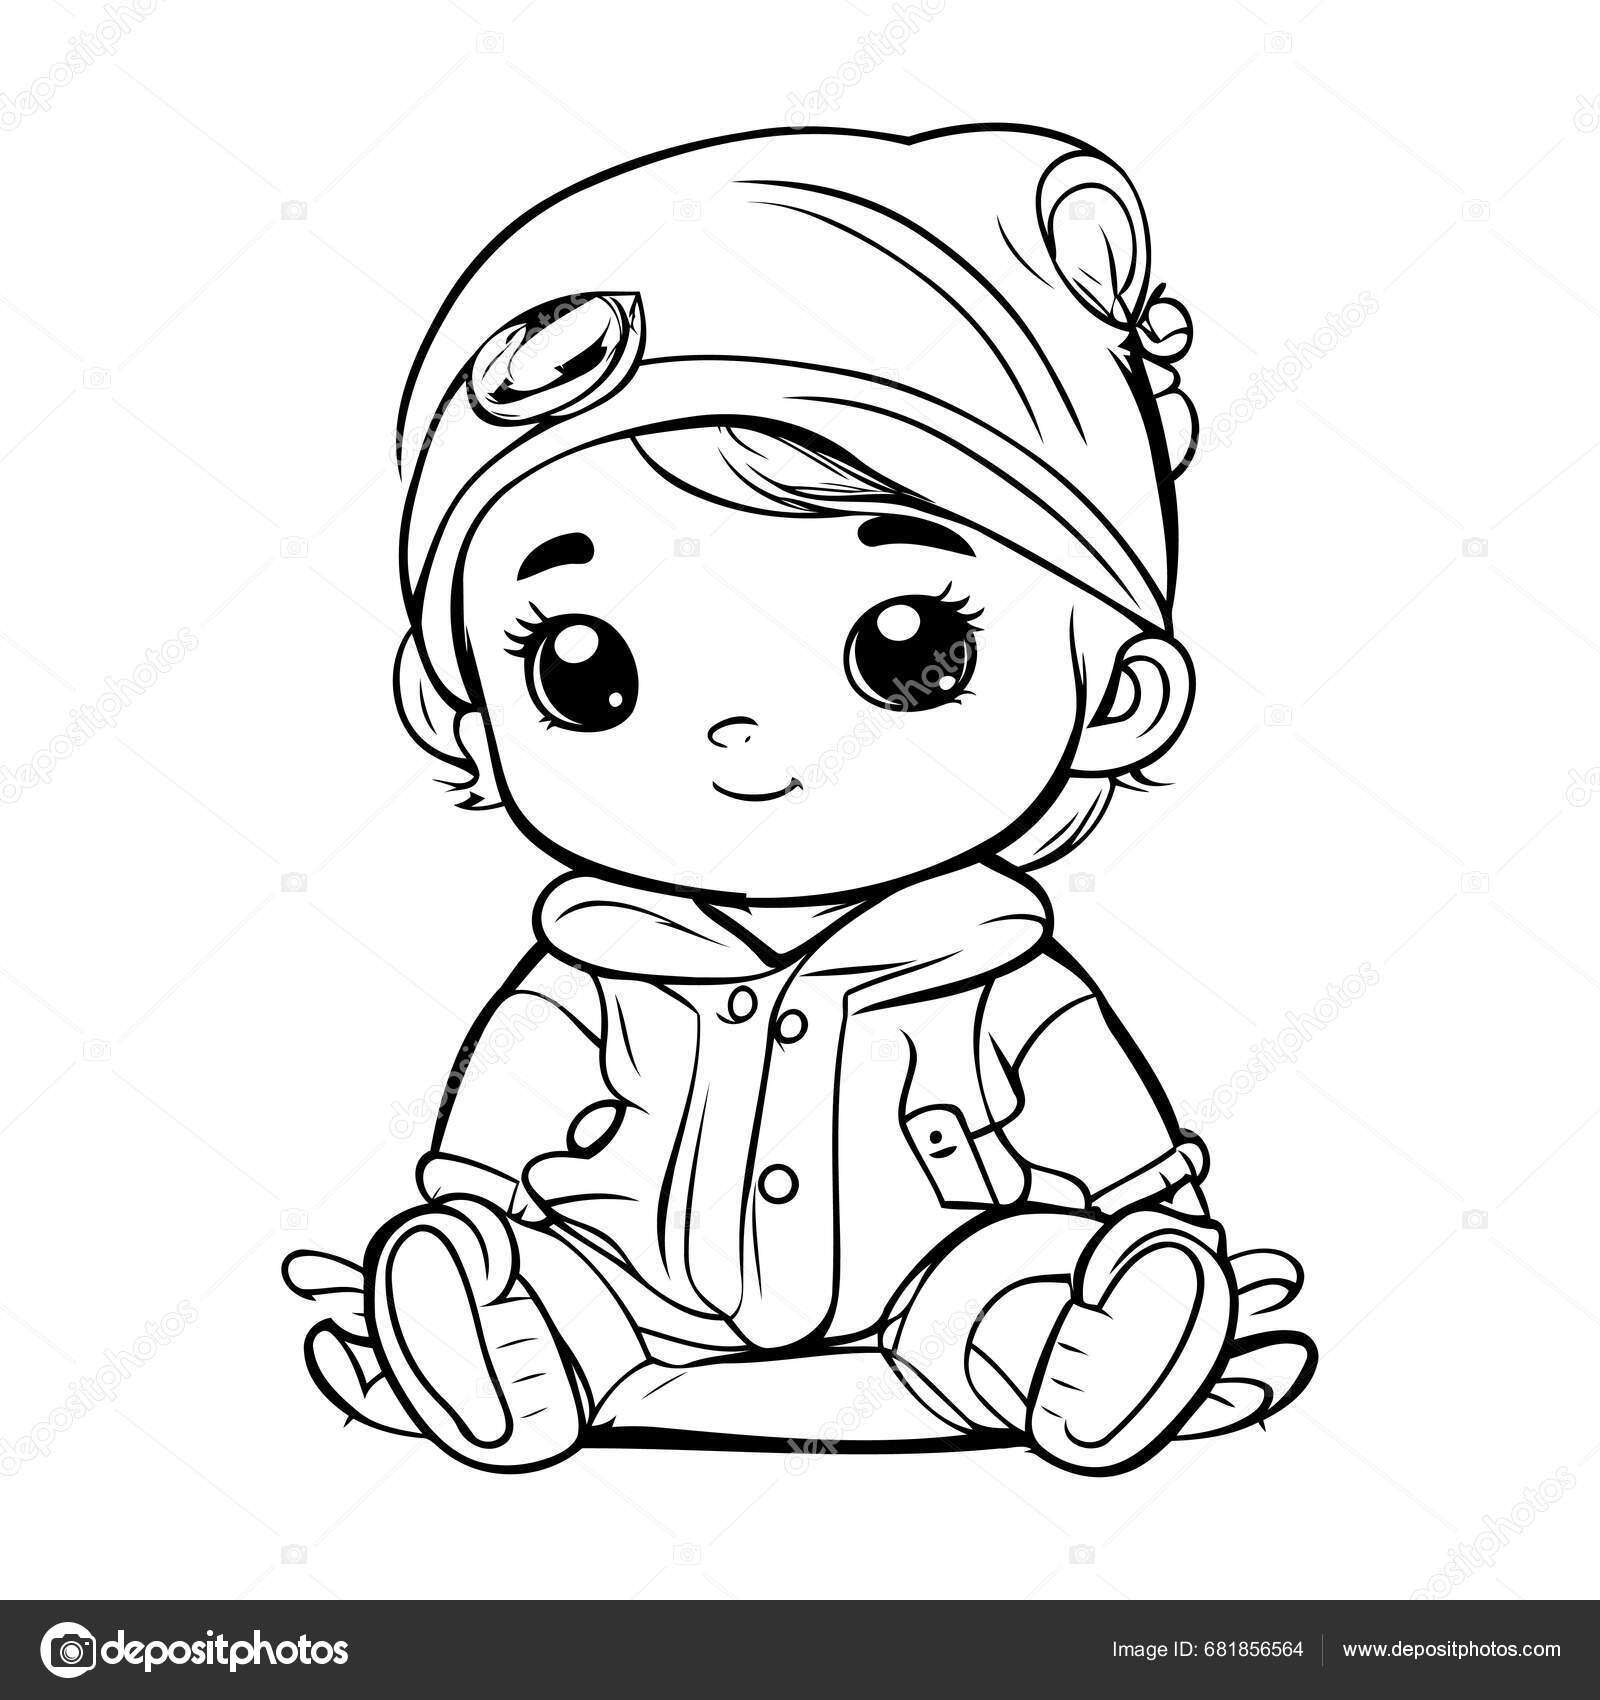 baby colouring book for toddlers and kids, boys and girls. Adorable  illustrations of babies to color